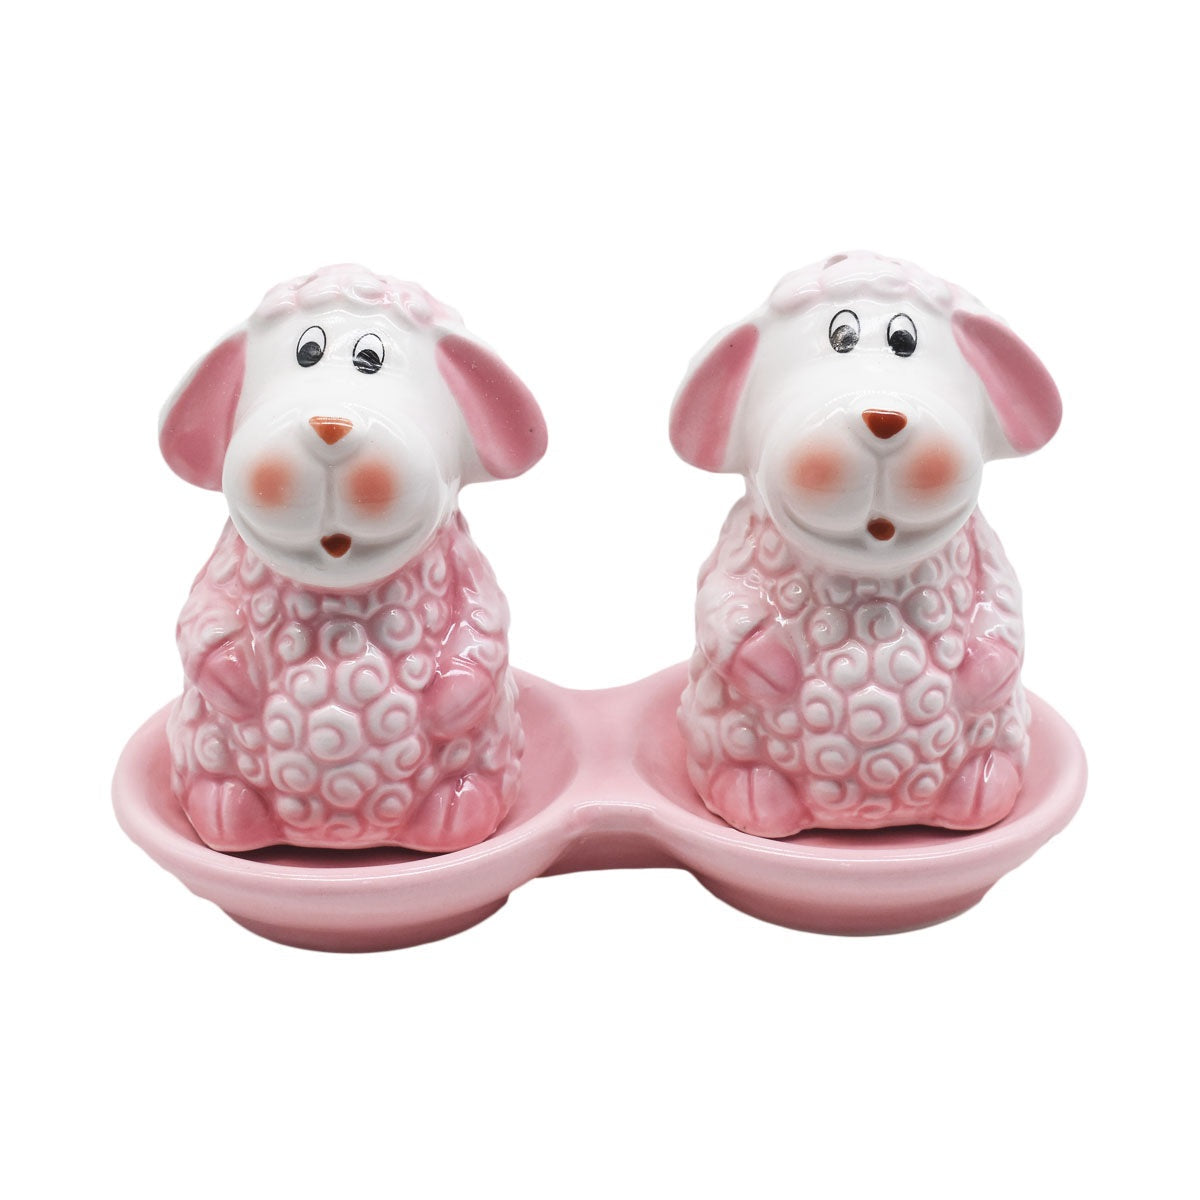 Ceramic Salt and Pepper Set with tray, Sheep Design, Purple (8564)